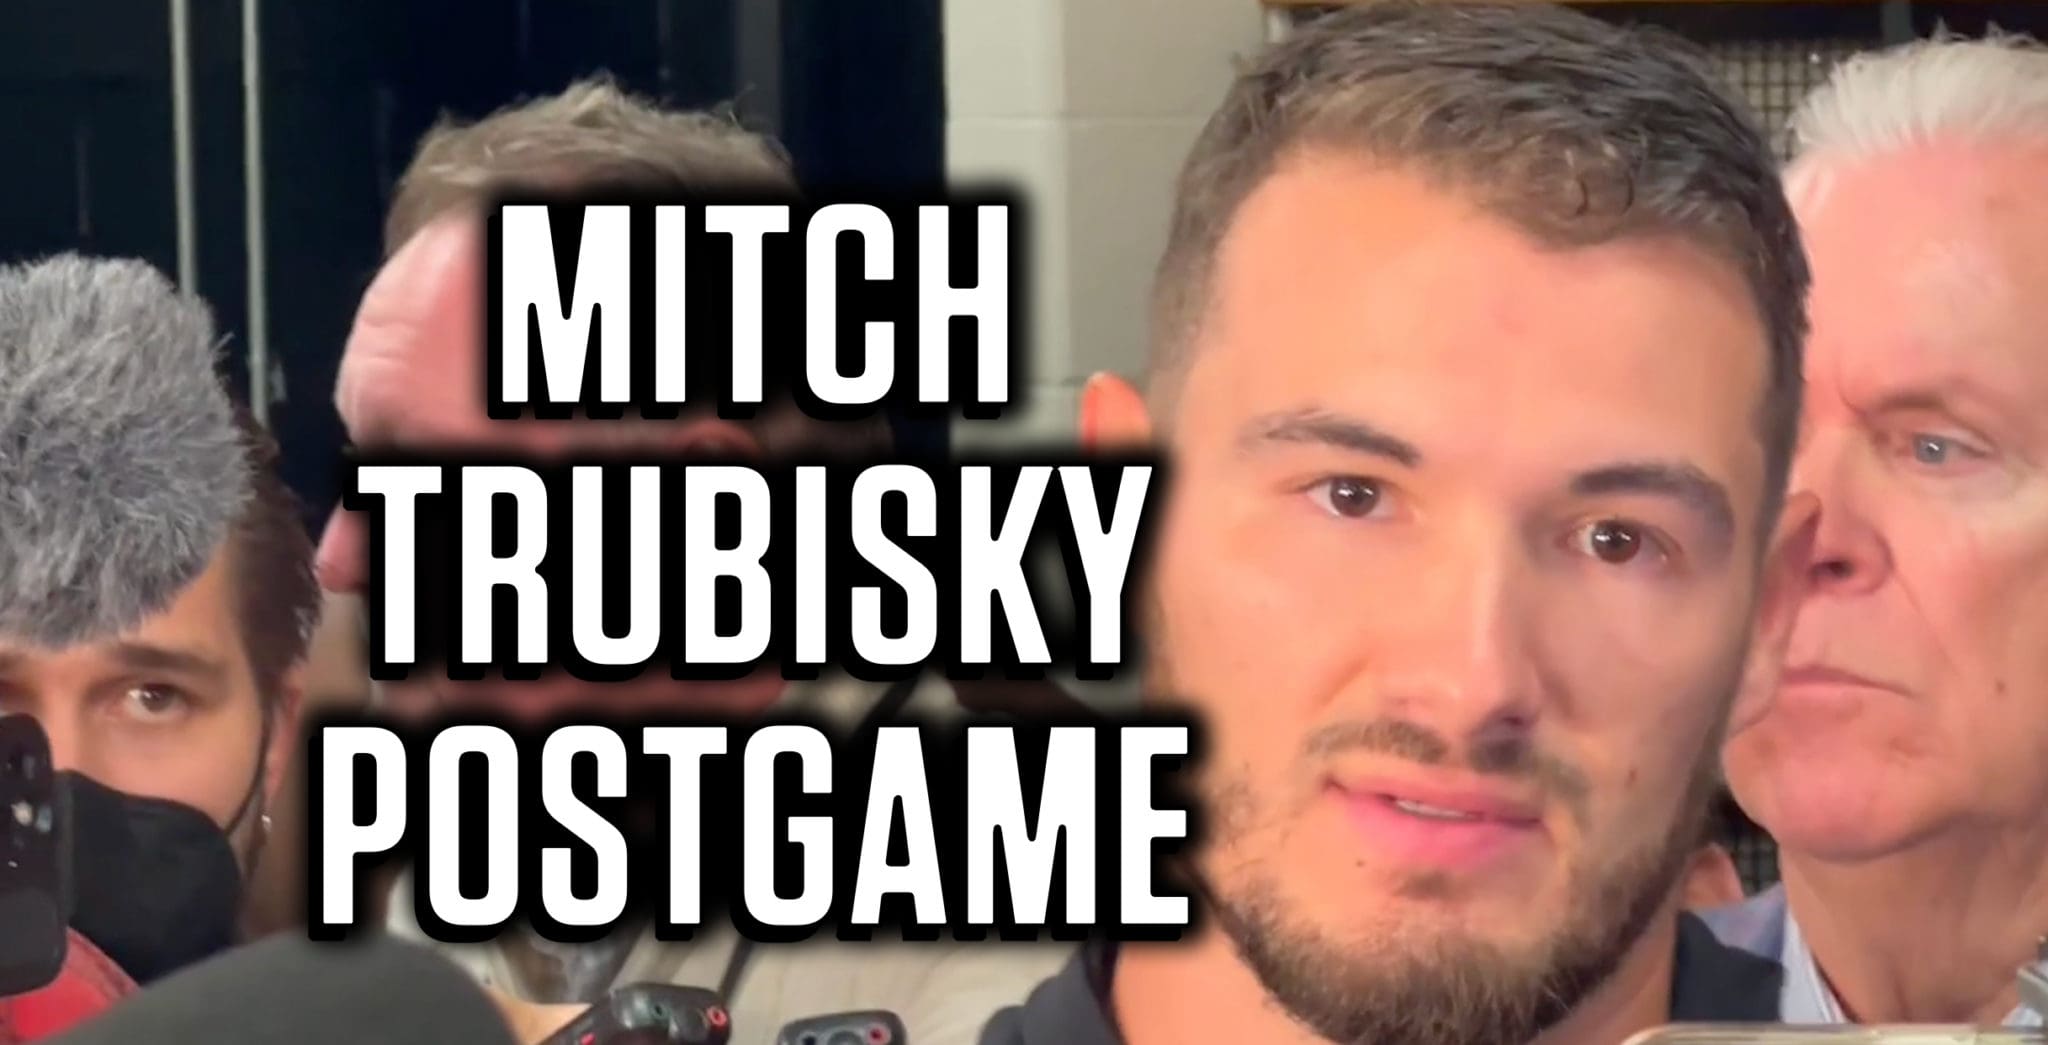 mitch-trubisky-postgame-steelers-jets-interview-video-thumbnail